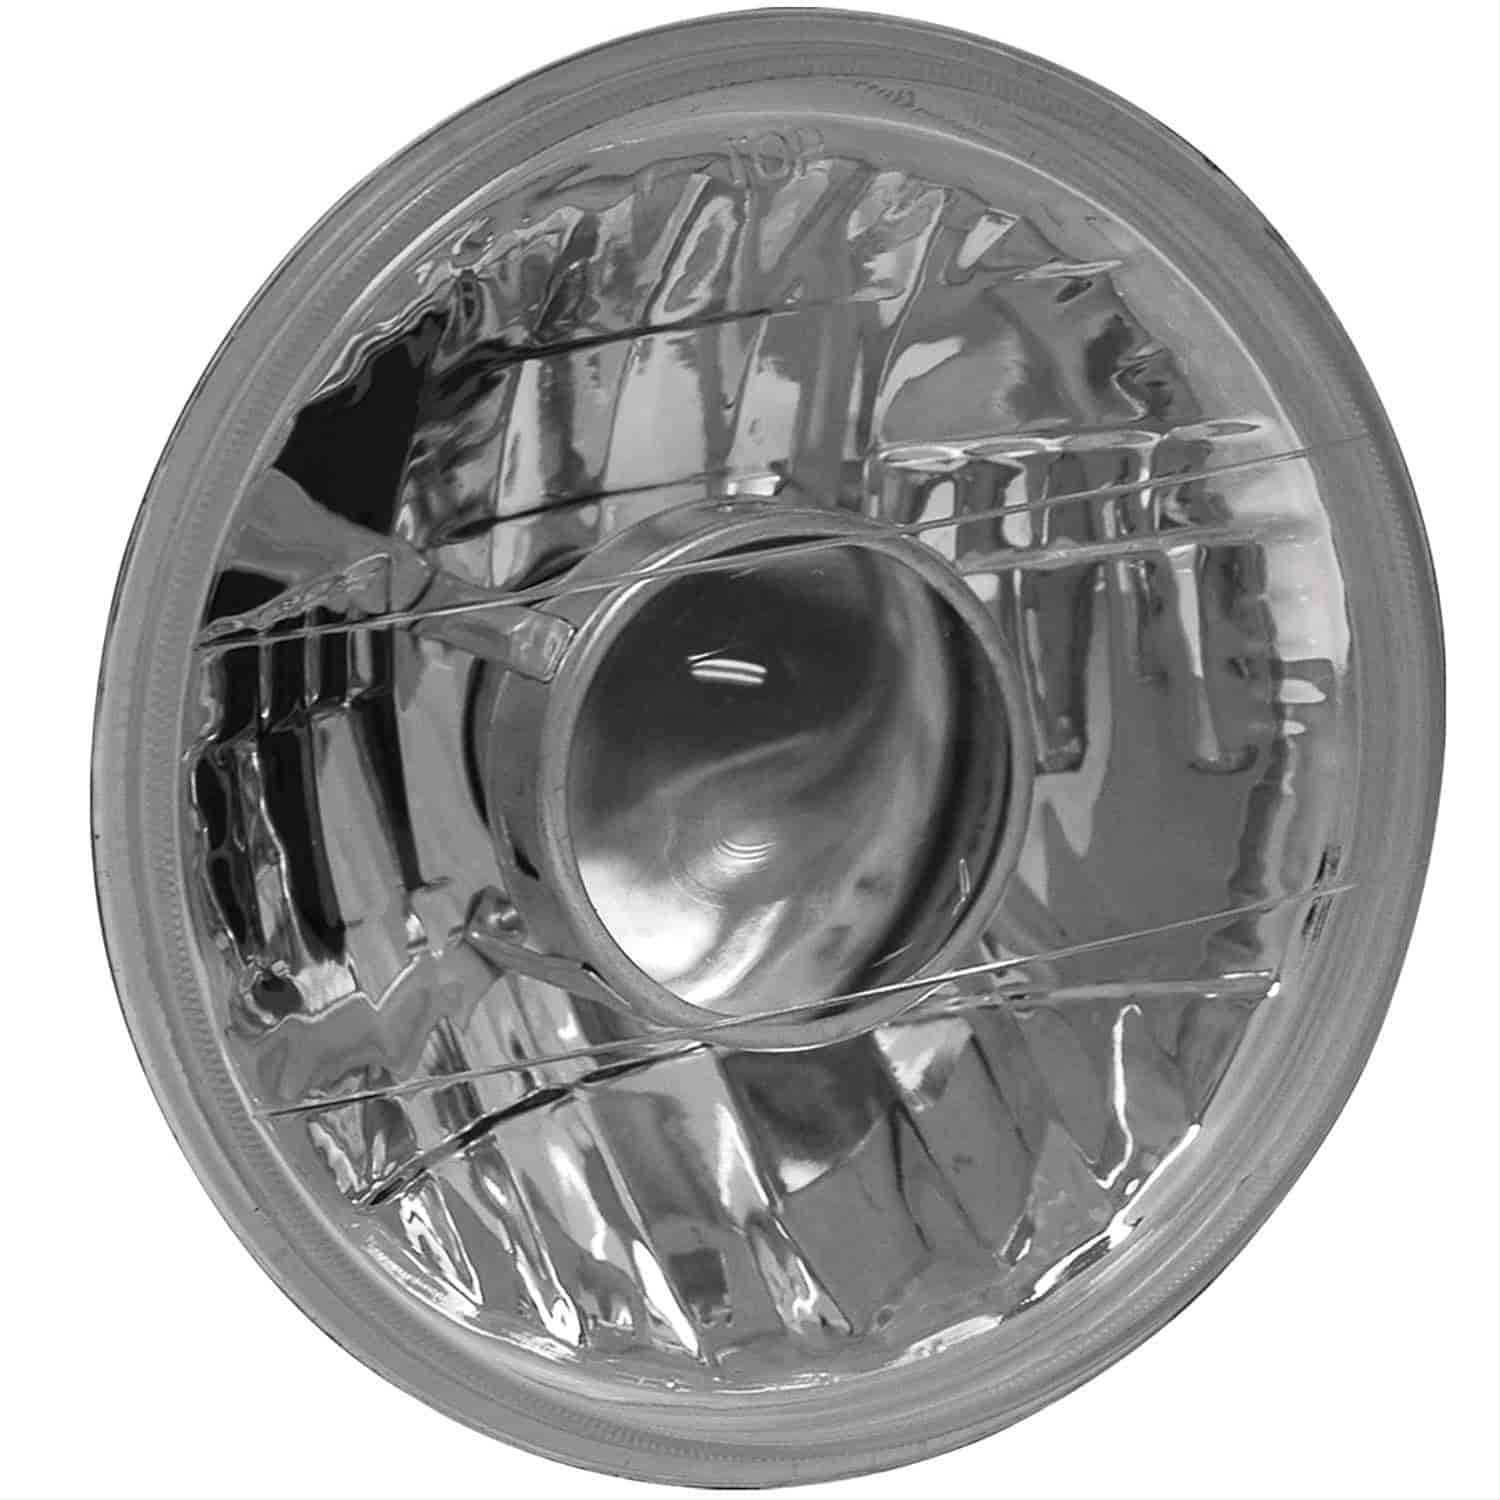 H4 7" Round Headlight with Projector Each